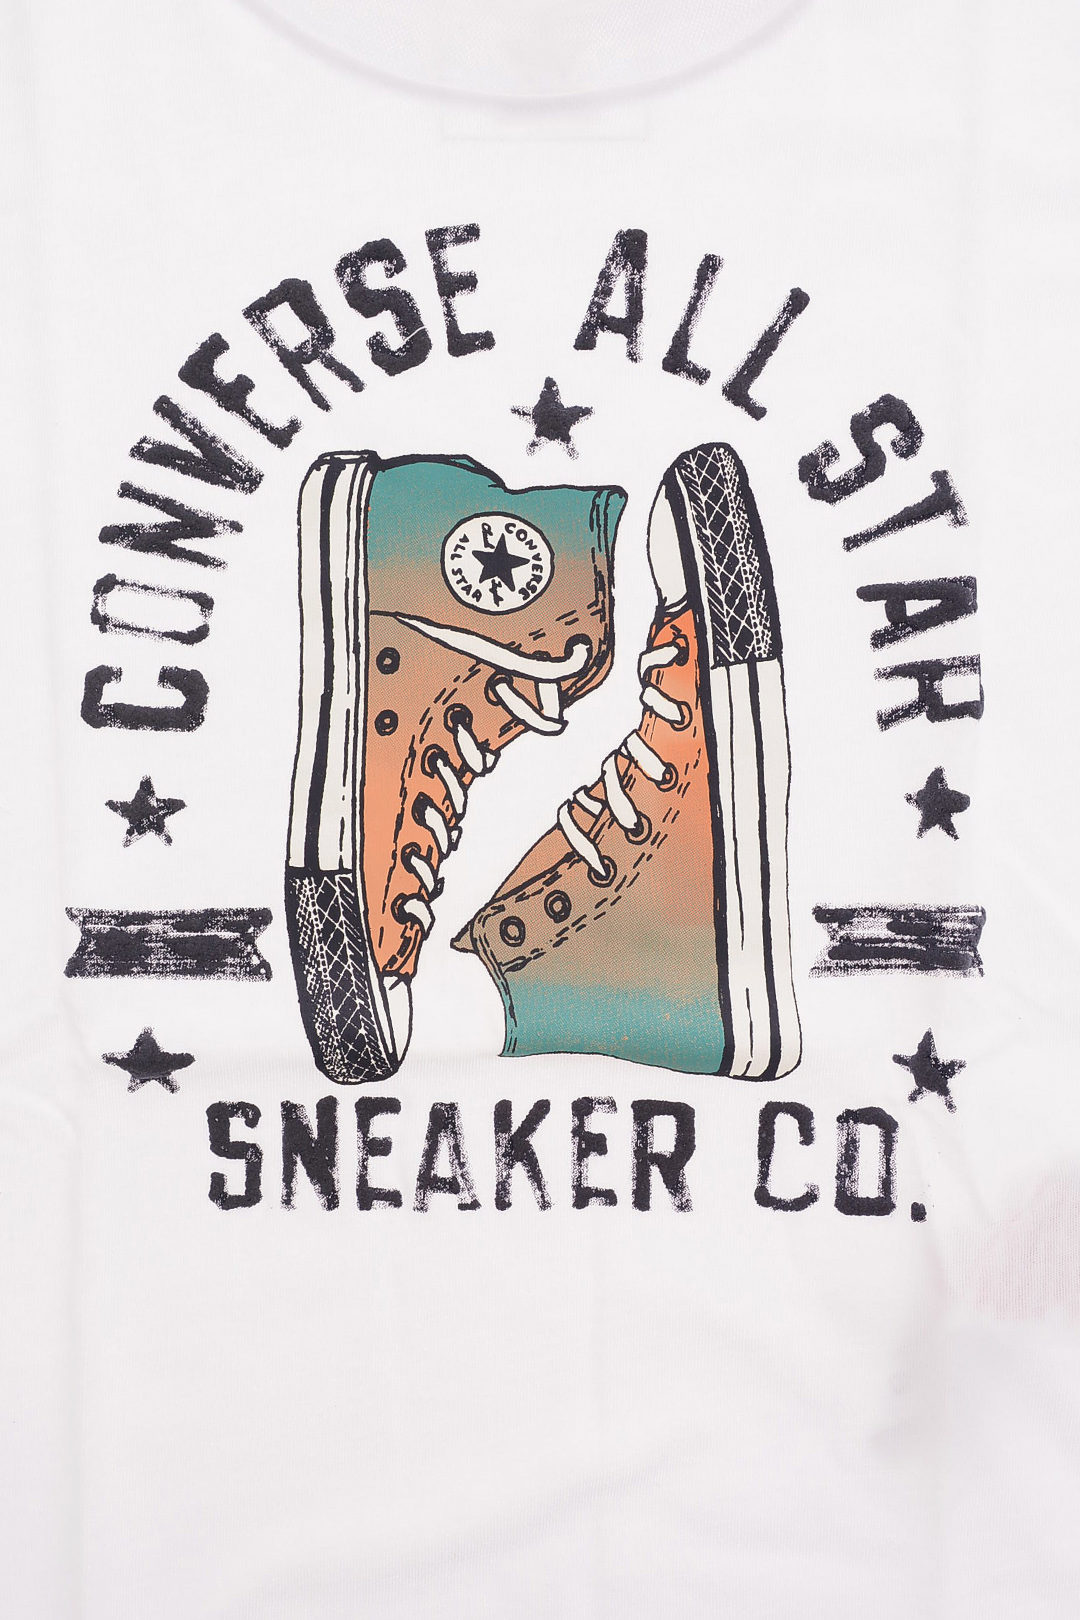 Converse KIDS ALL STAR CHUCK TAYLOR Logo Printed T-Shirt and Leggings Set  girls - Glamood Outlet